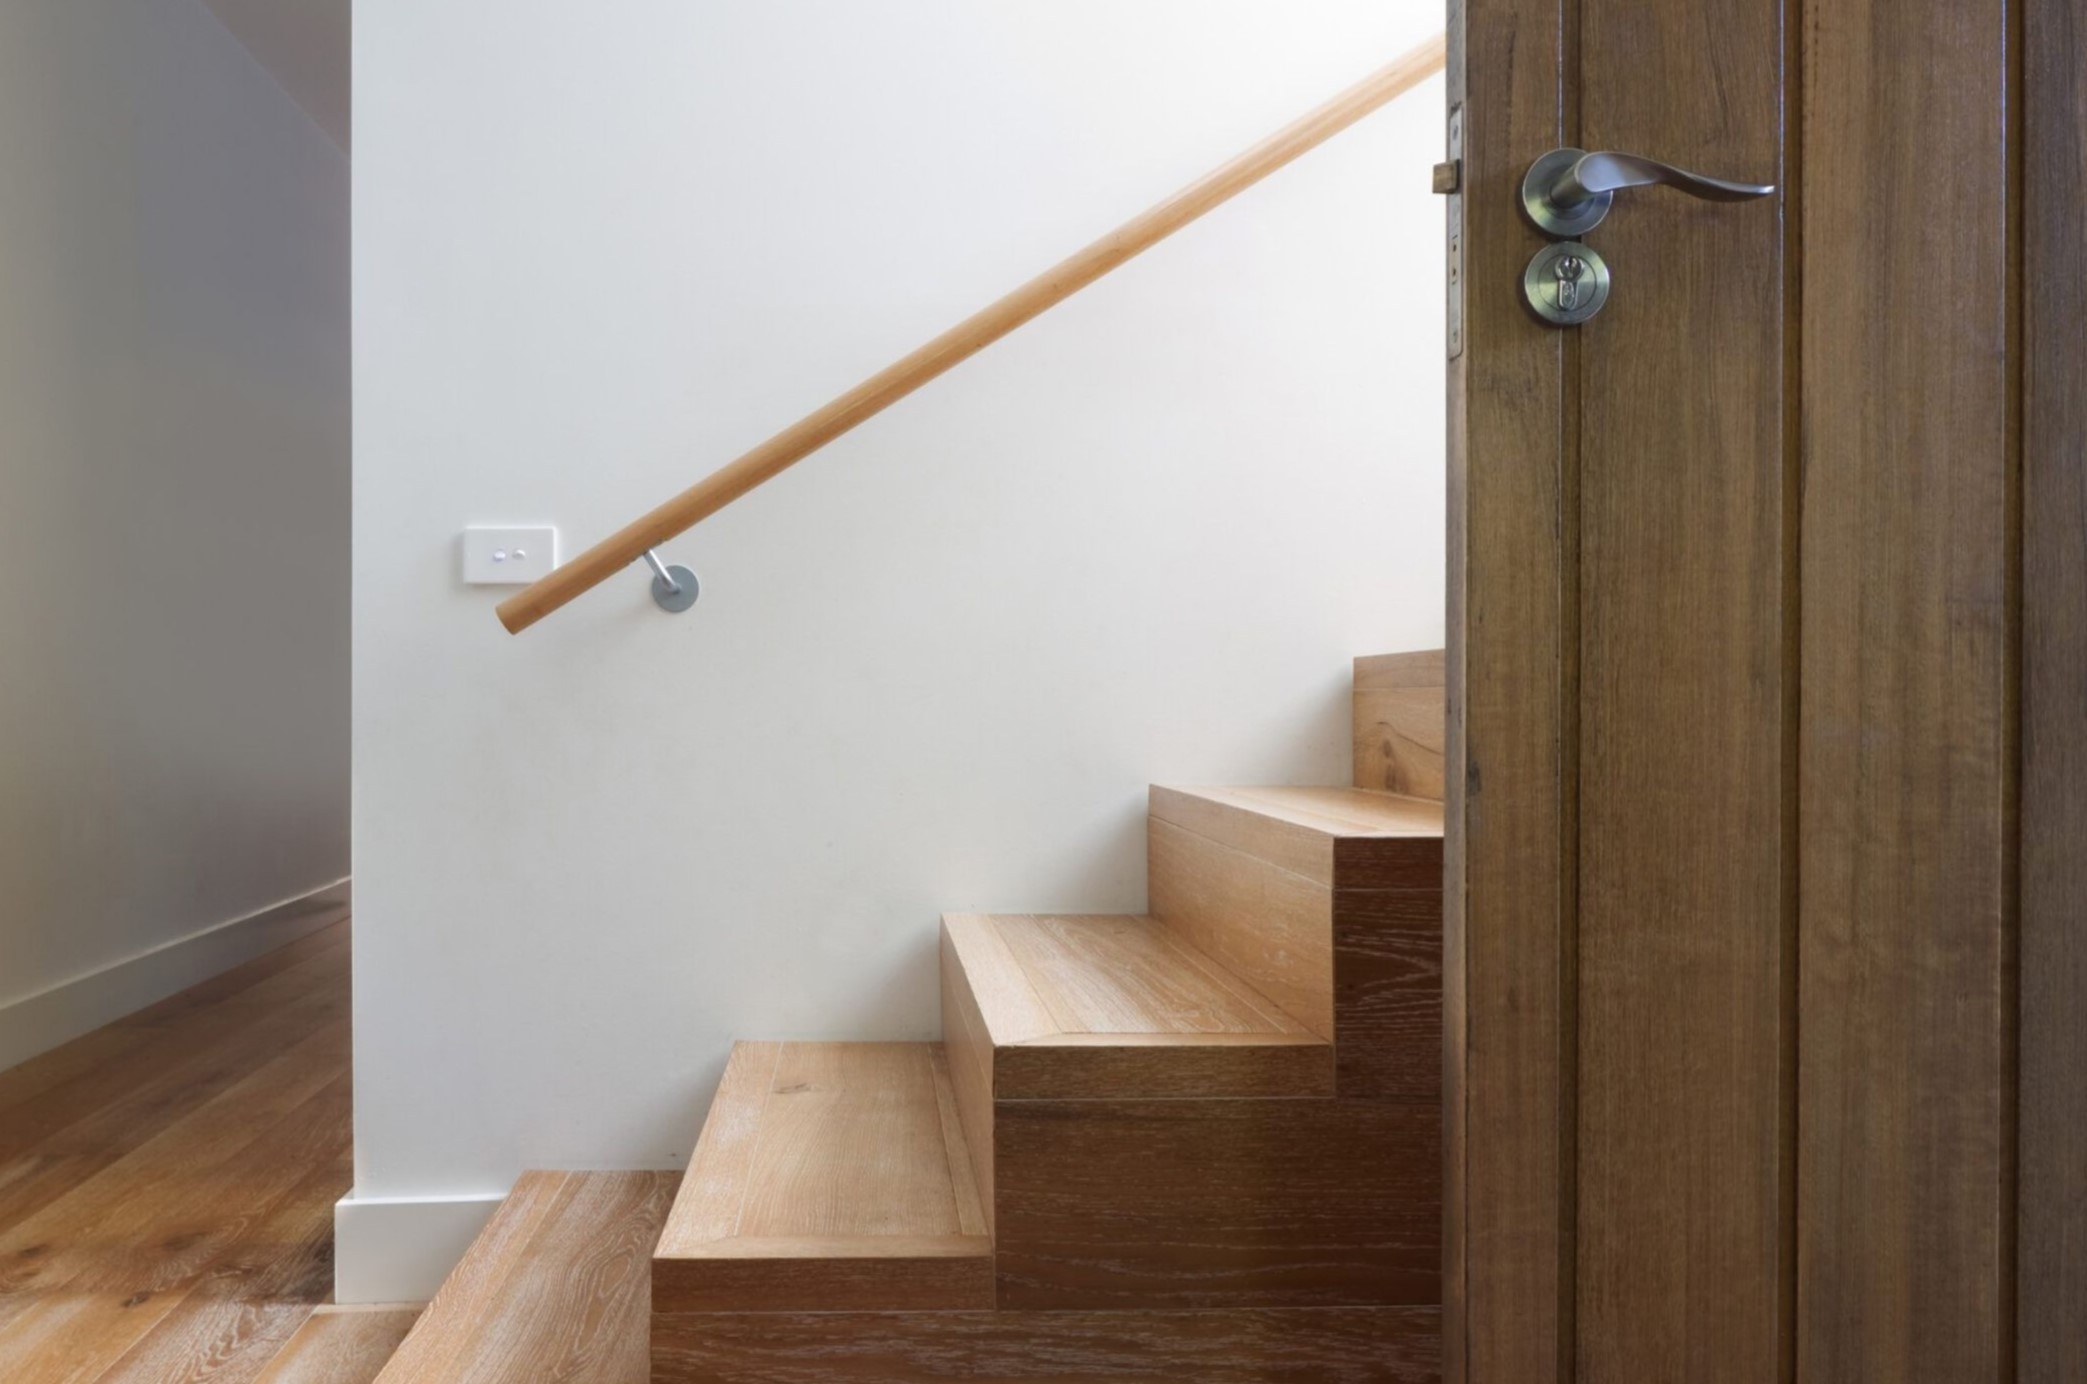 Home Repair: How To Repair Stair Railing Attached To Wall